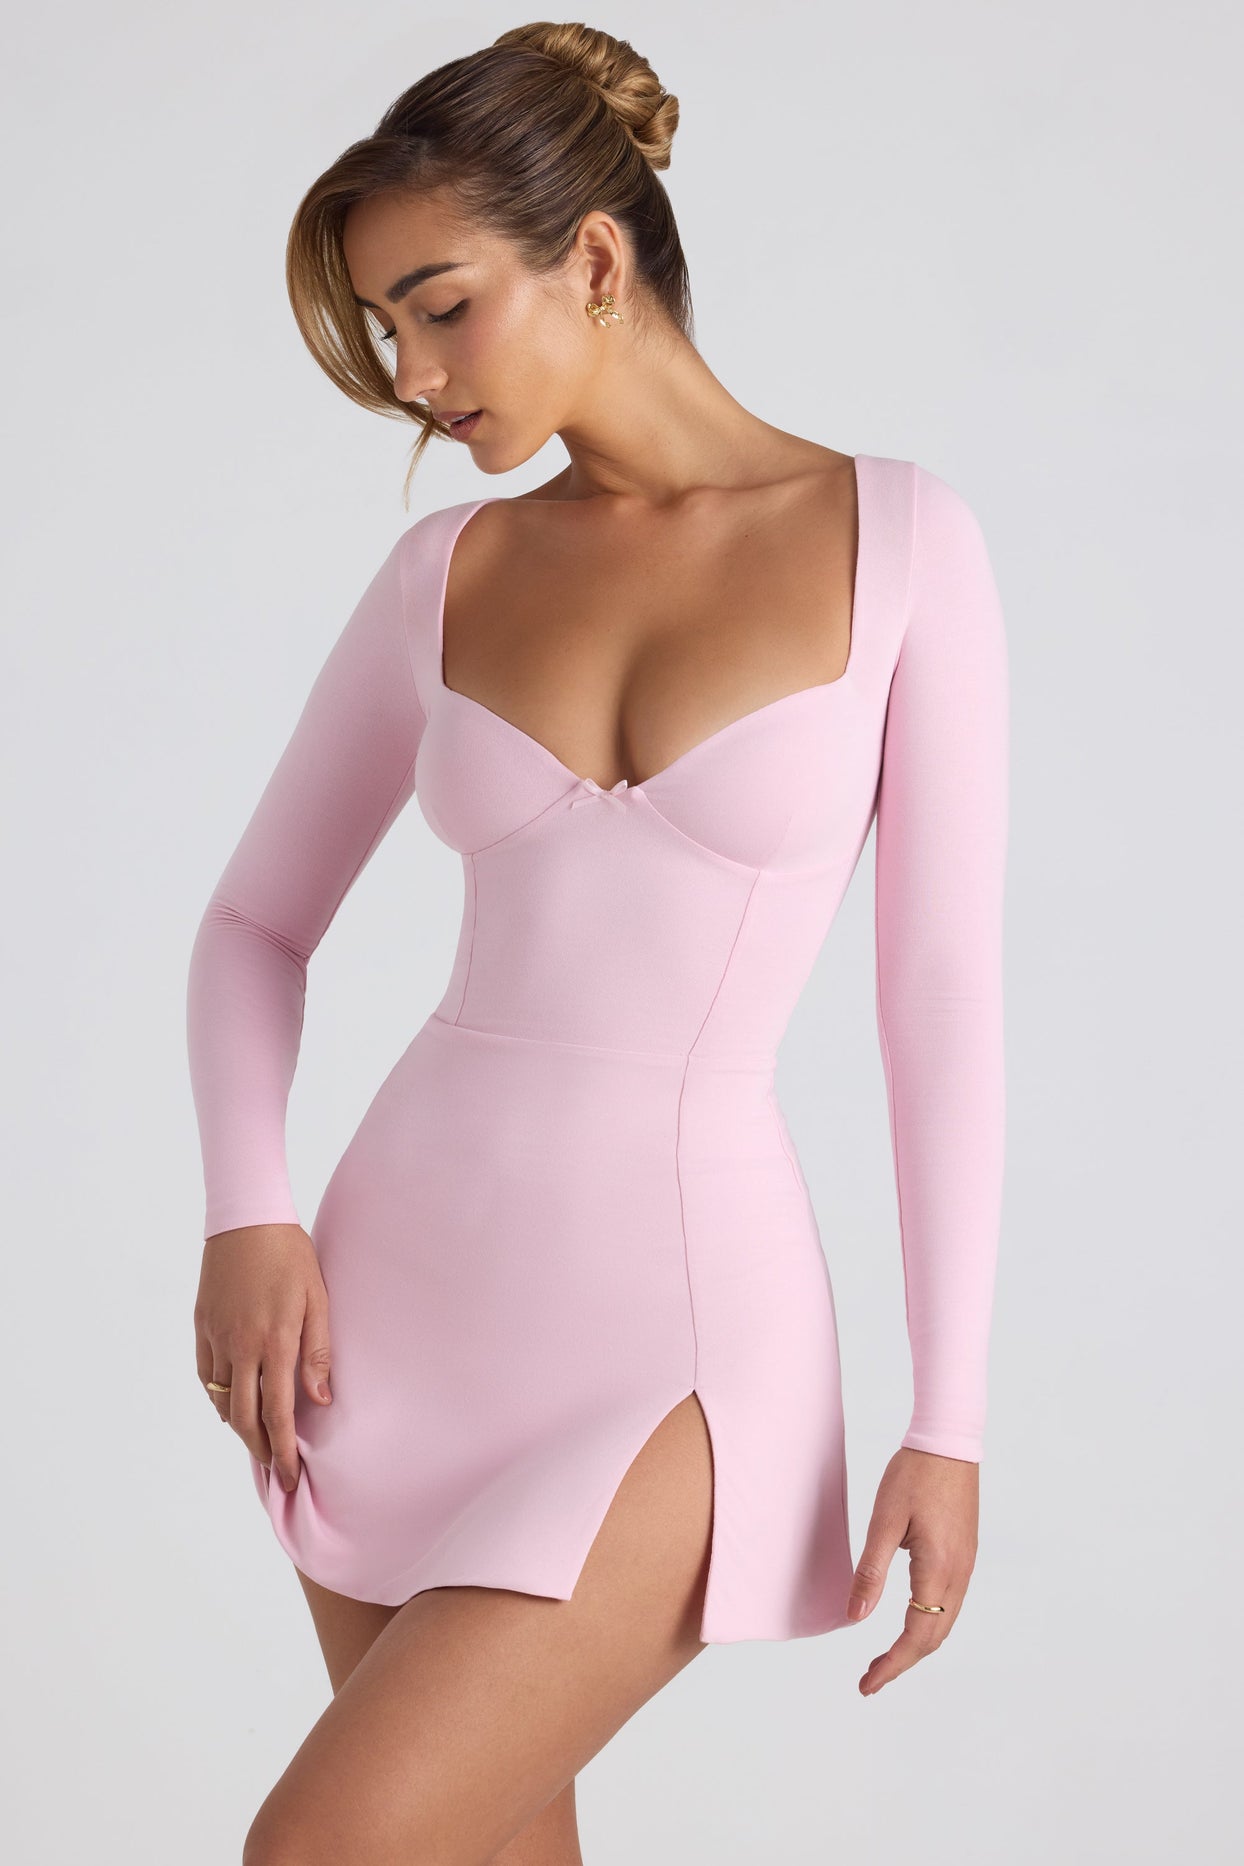 Modal Bow-Embellished Sweetheart-Neck A-Line Mini Dress in Soft Pink